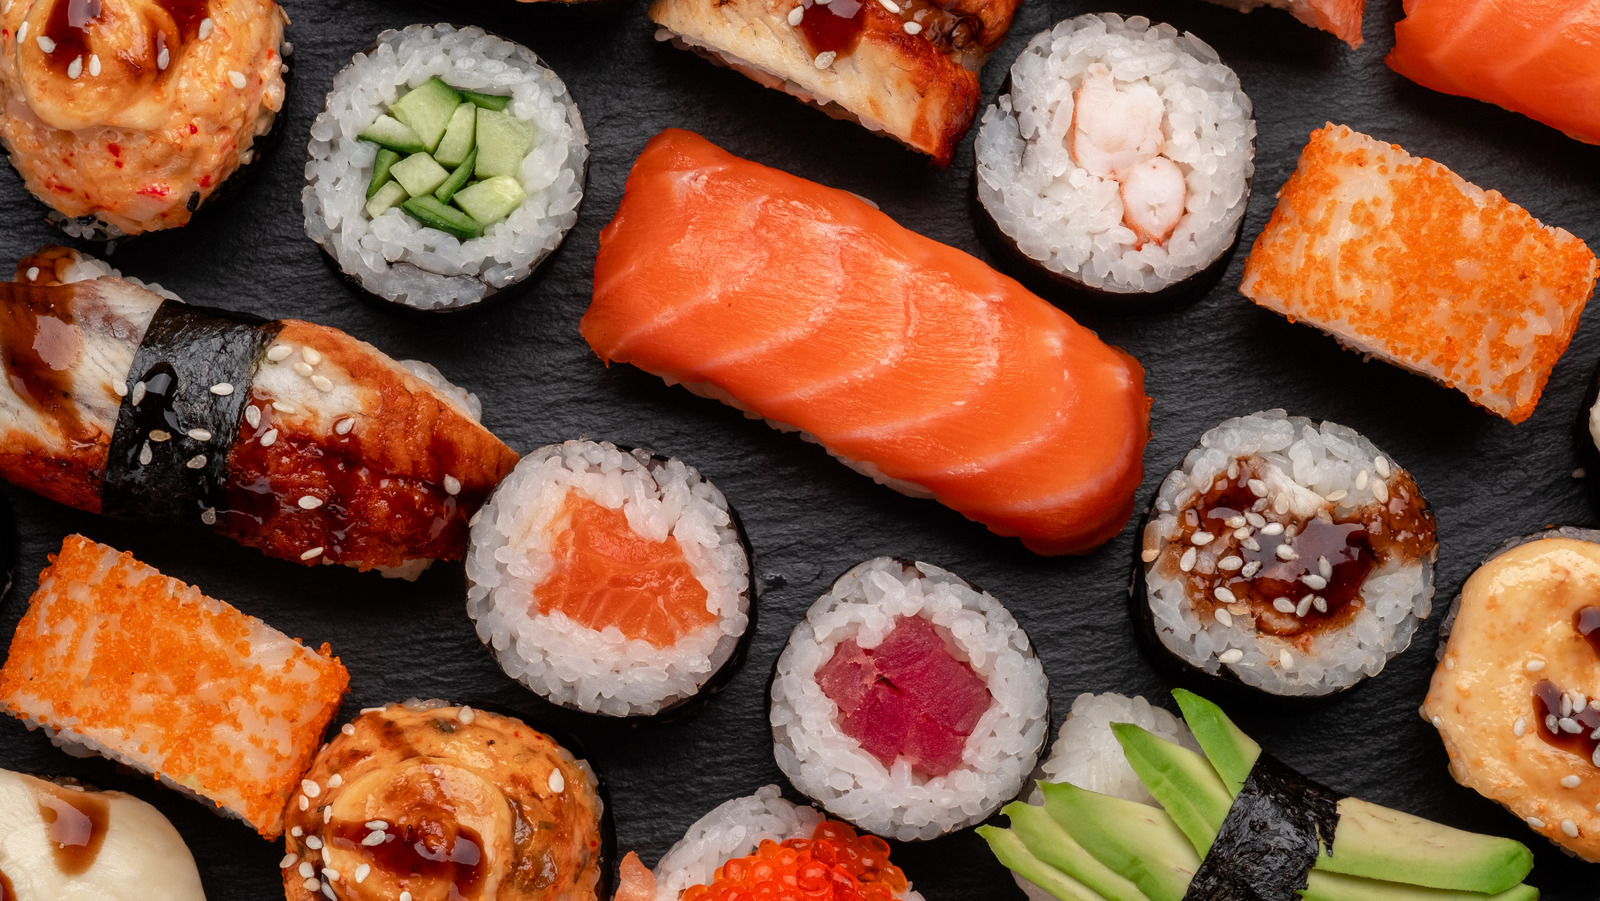 https://www.tastingtable.com/img/gallery/the-reason-sushi-prices-are-soaring-isnt-what-you-think/l-intro-1641568651.jpg